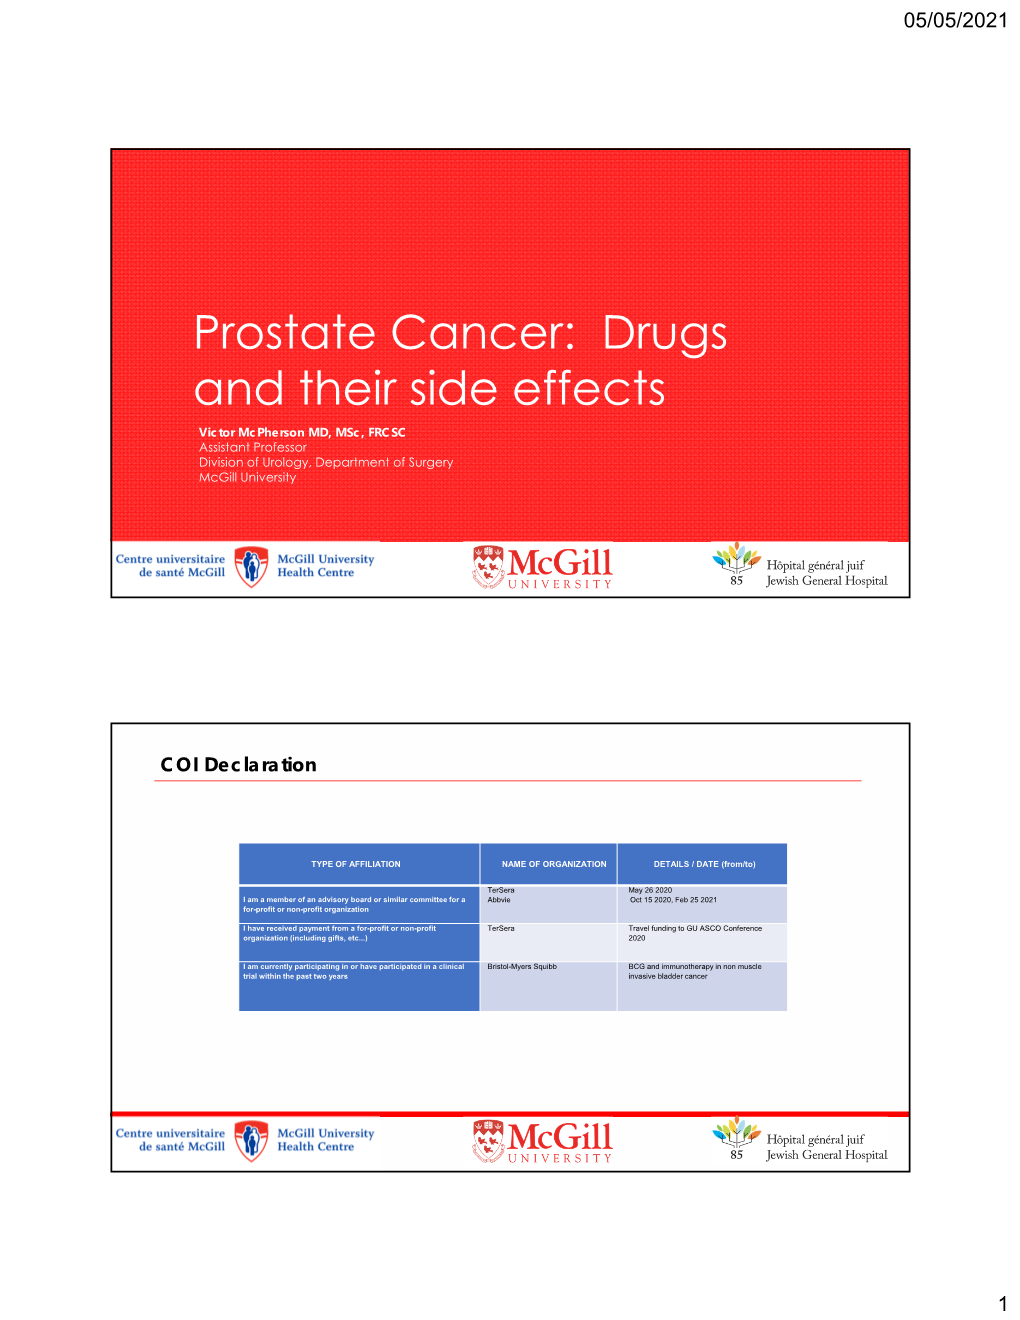 Prostate Cancer: Drugs and Their Side Effects Victor Mcpherson MD, Msc, FRCSC Assistant Professor Division of Urology, Department of Surgery Mcgill University